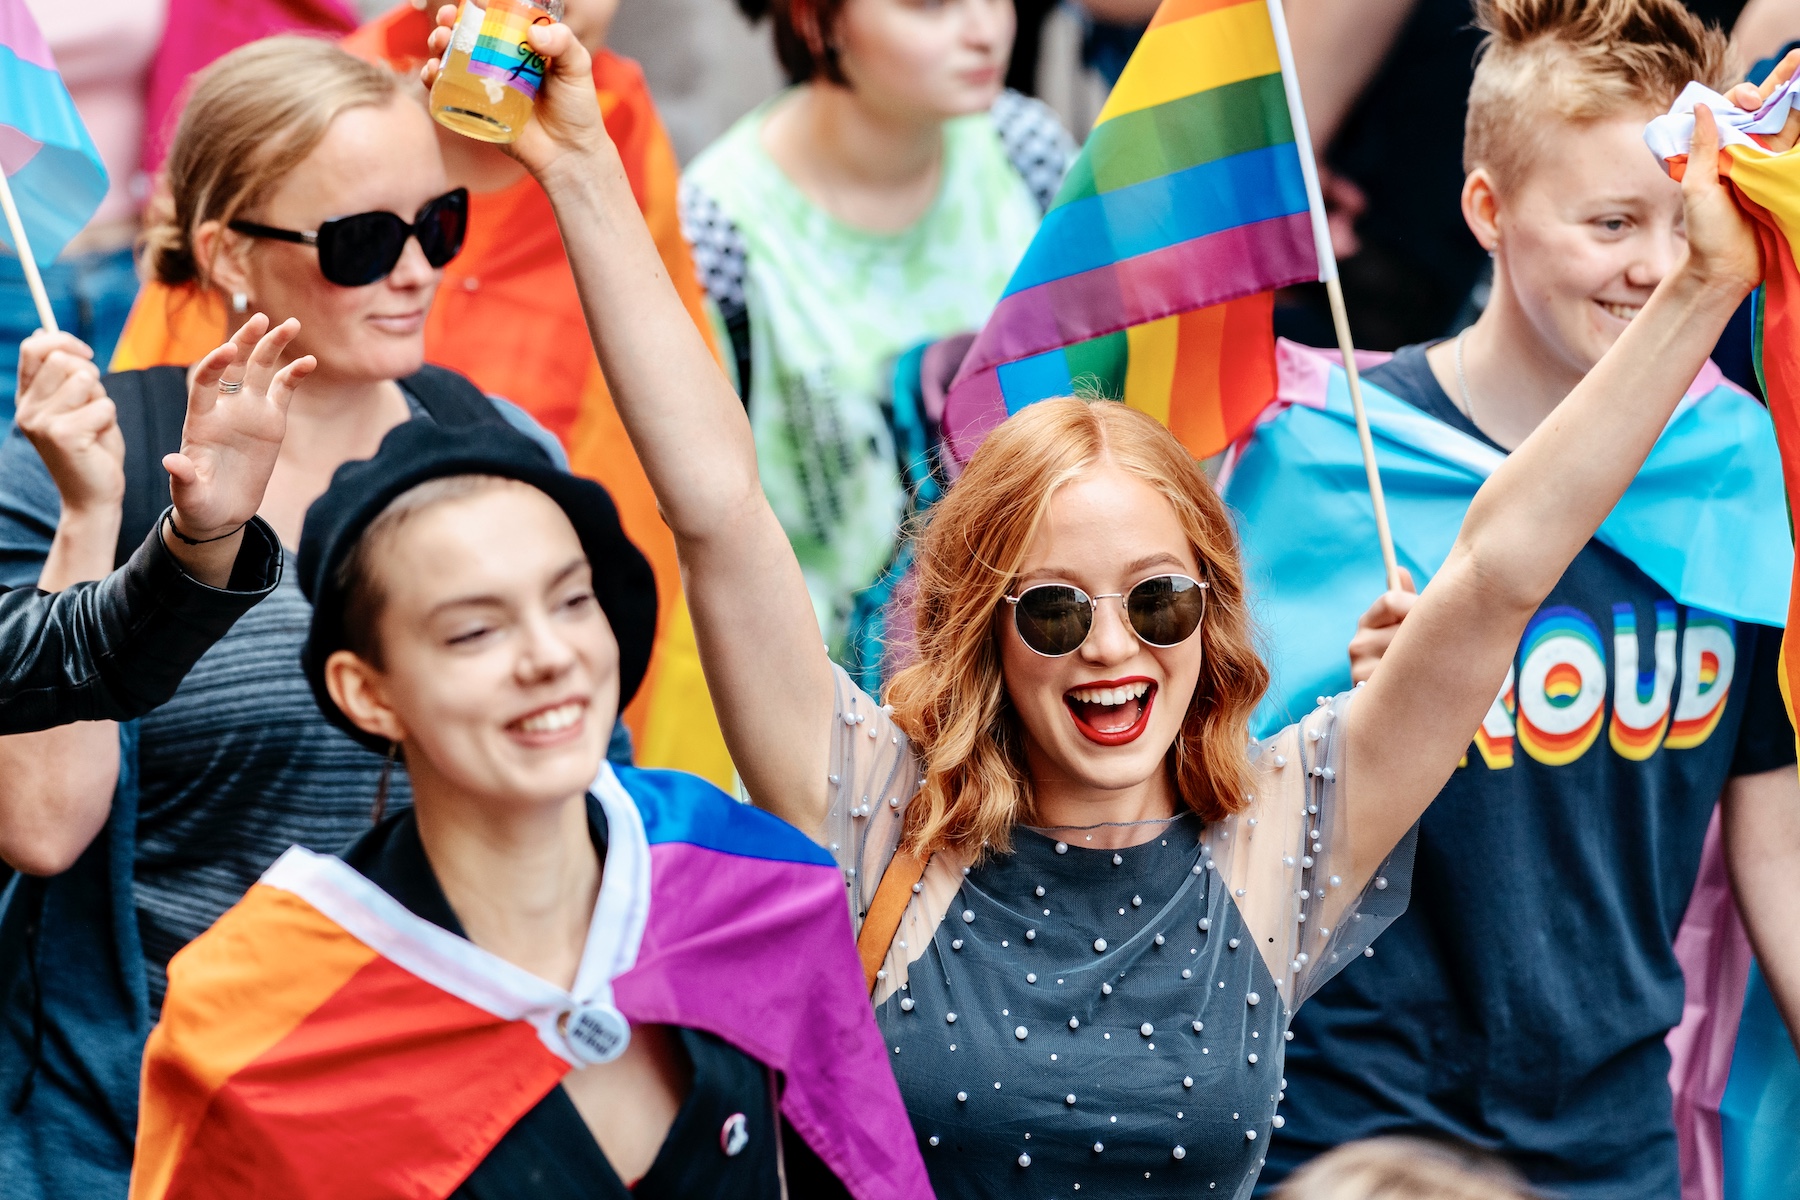 Finland Has Passed A New Law Allowing People To Self-Identify Their Legal Gender